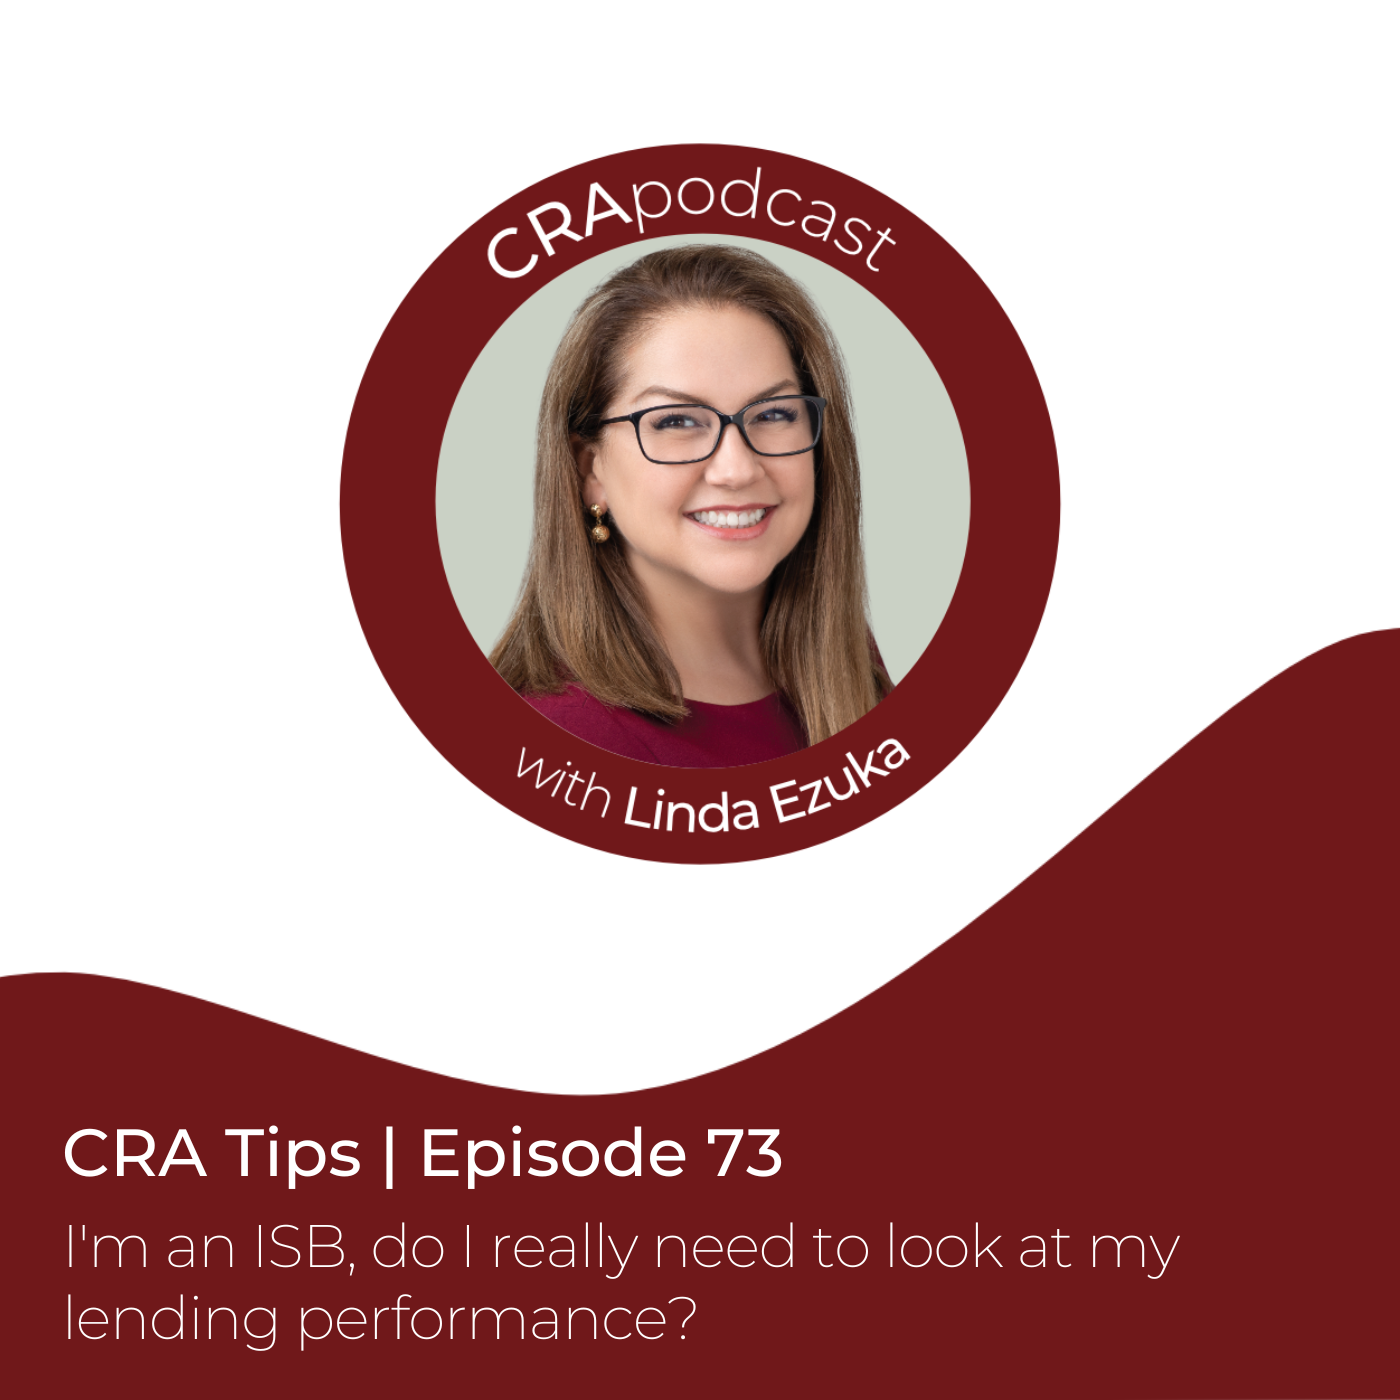 Episode 73: CRA Tips: I’m an ISB, do I really need to look at my lending performance?